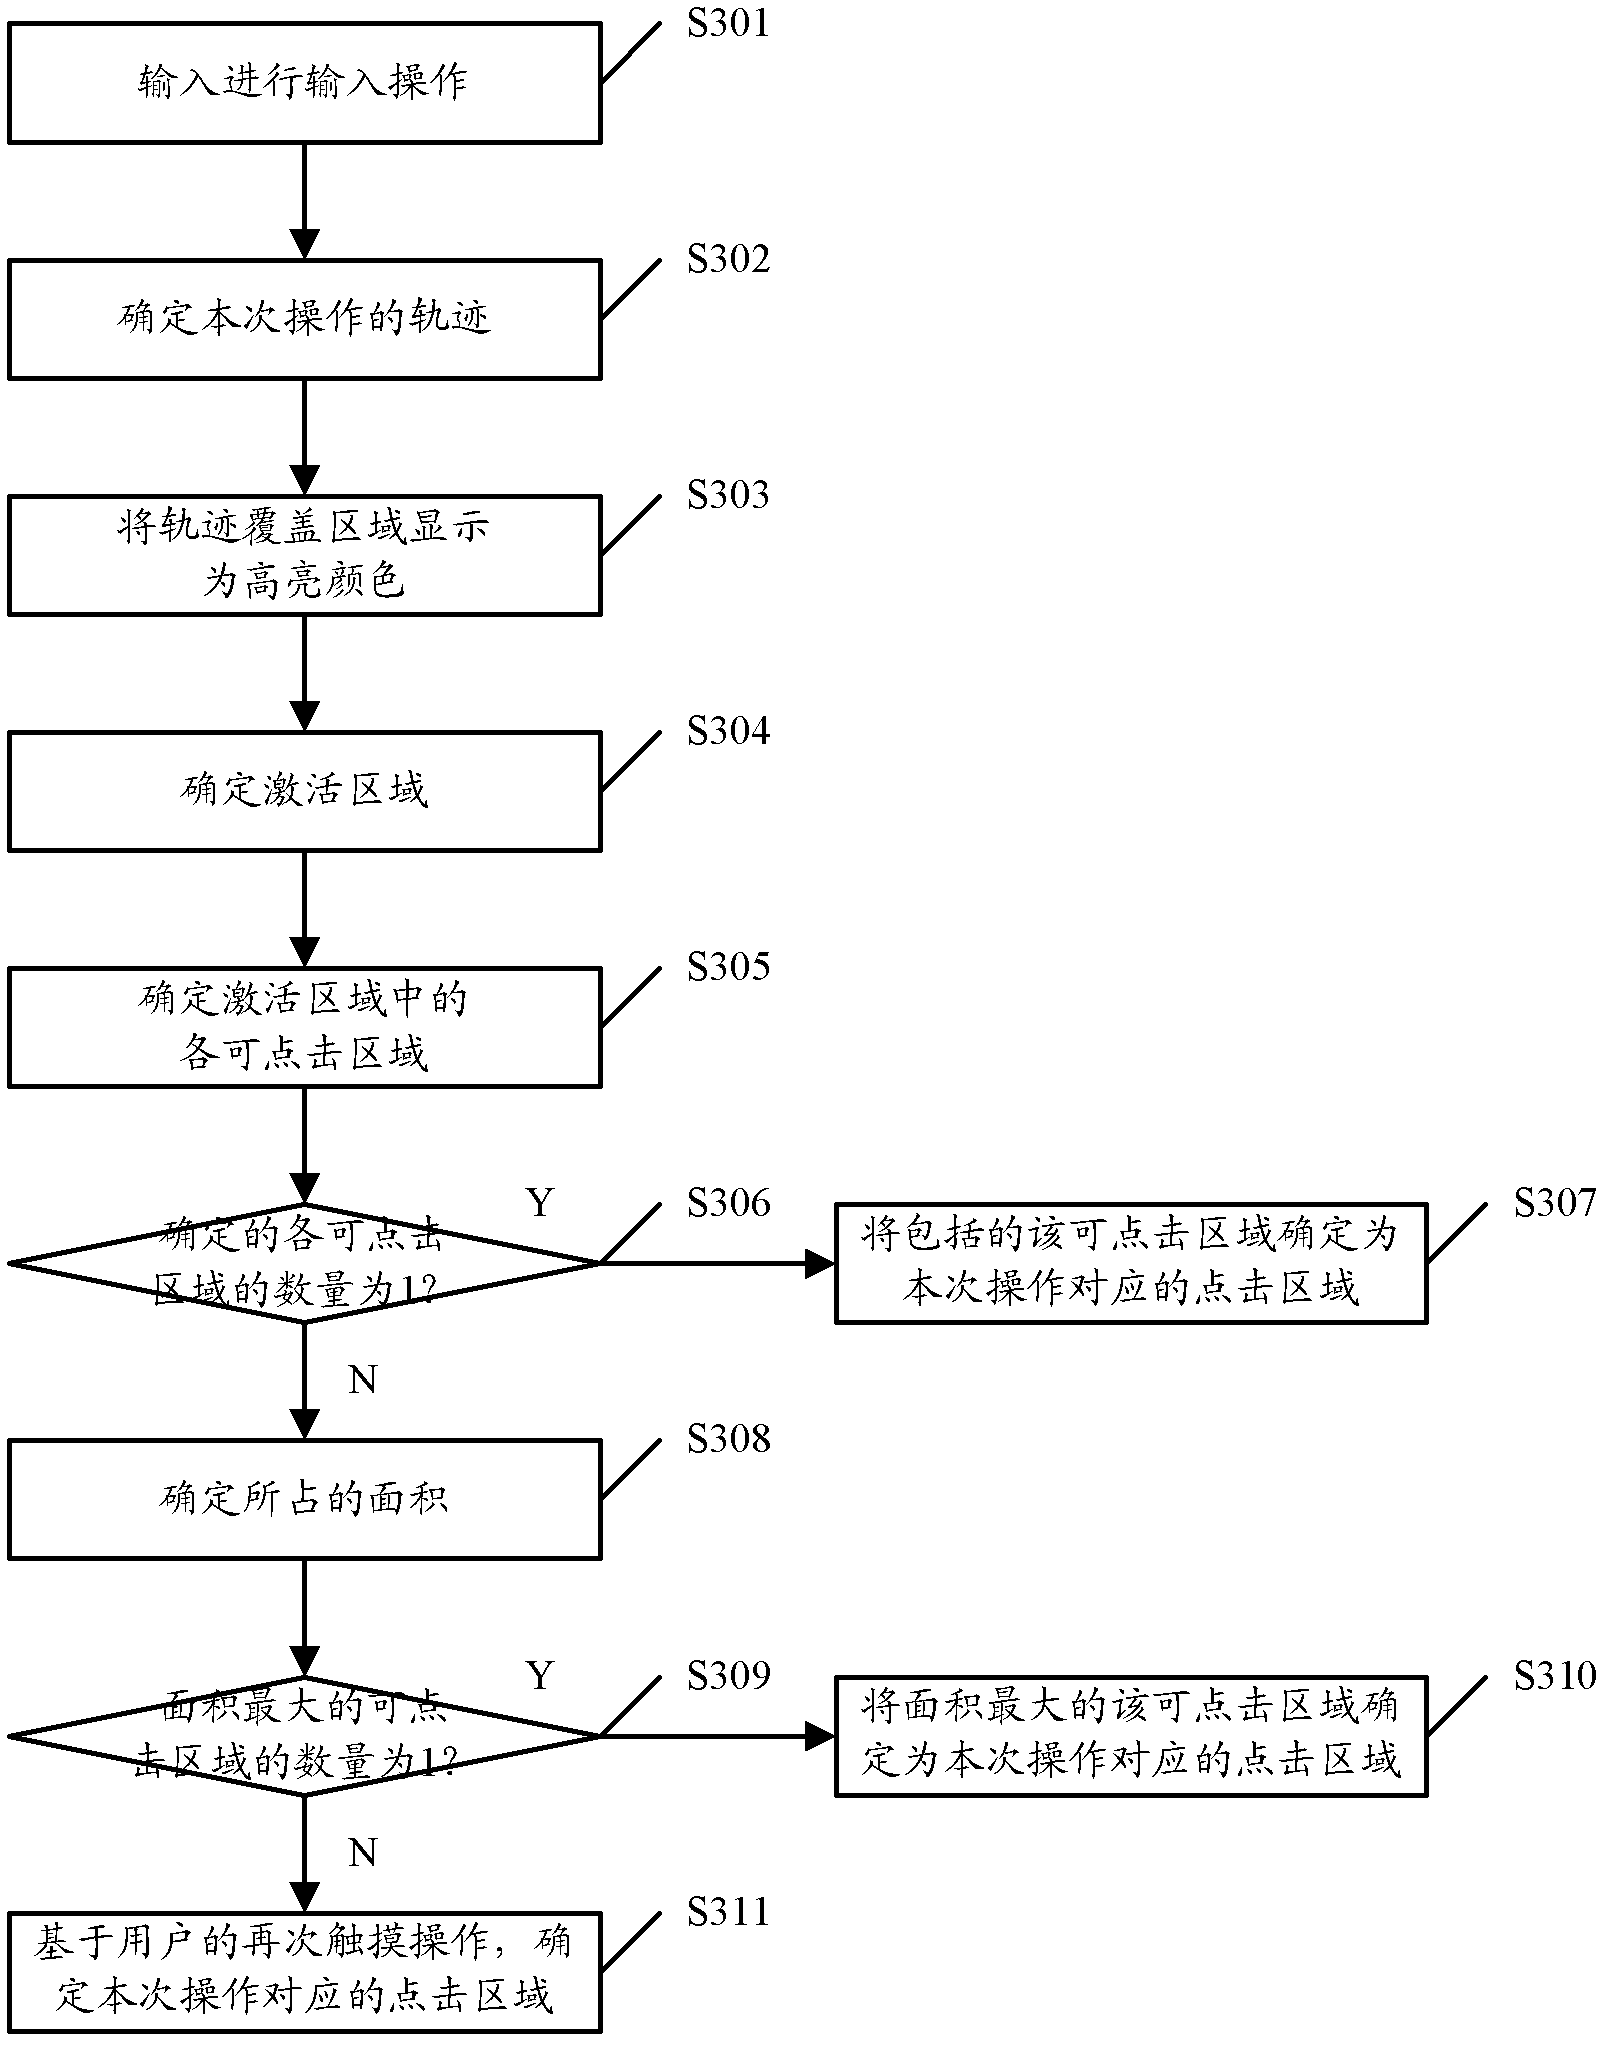 Method and device for confirming click areas on touch screen